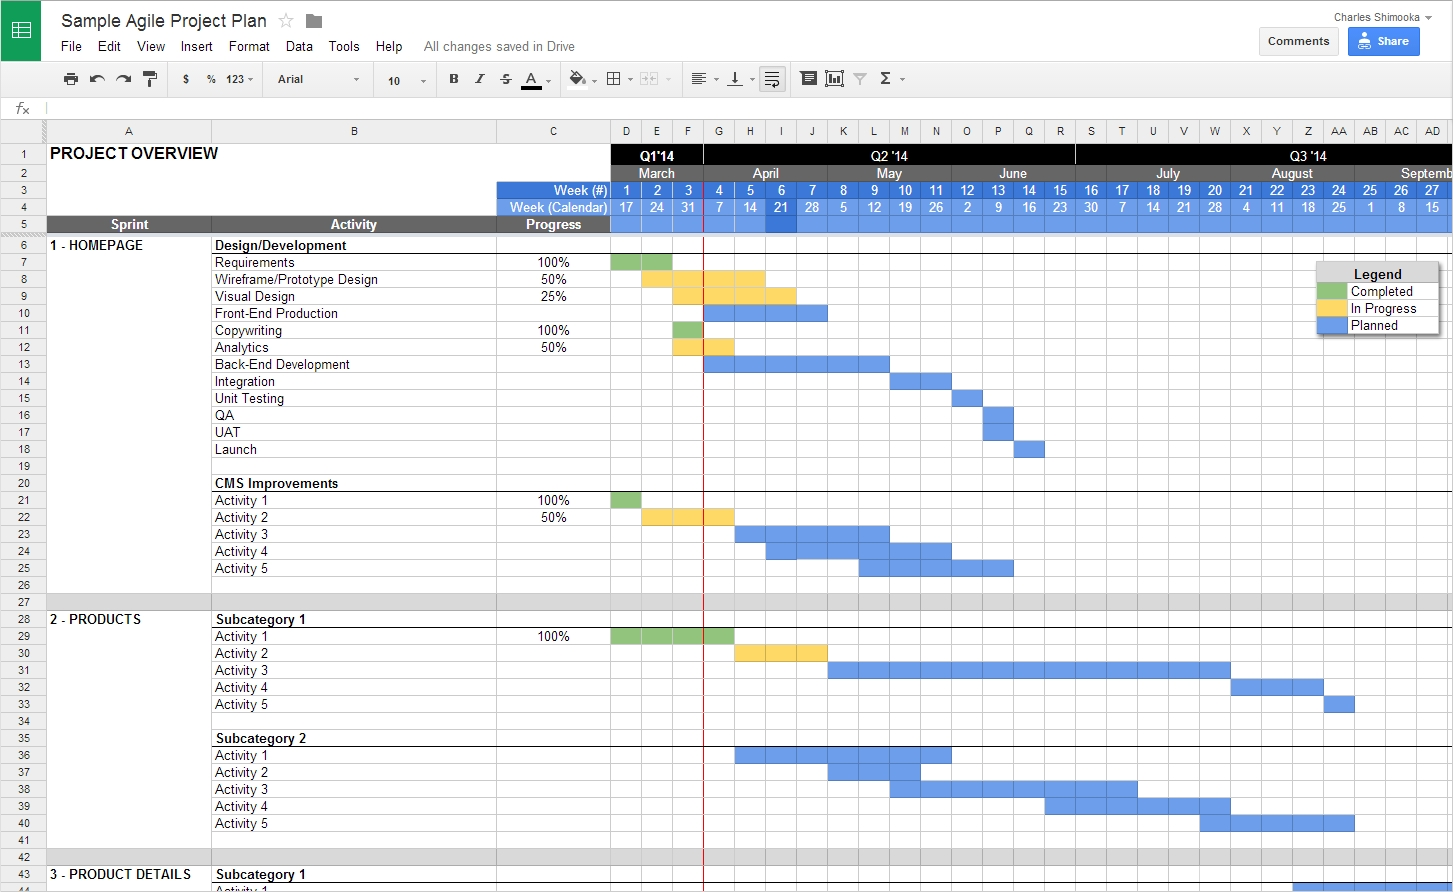 Agile Project Planning With Google Docs – Charles Shimooka With 